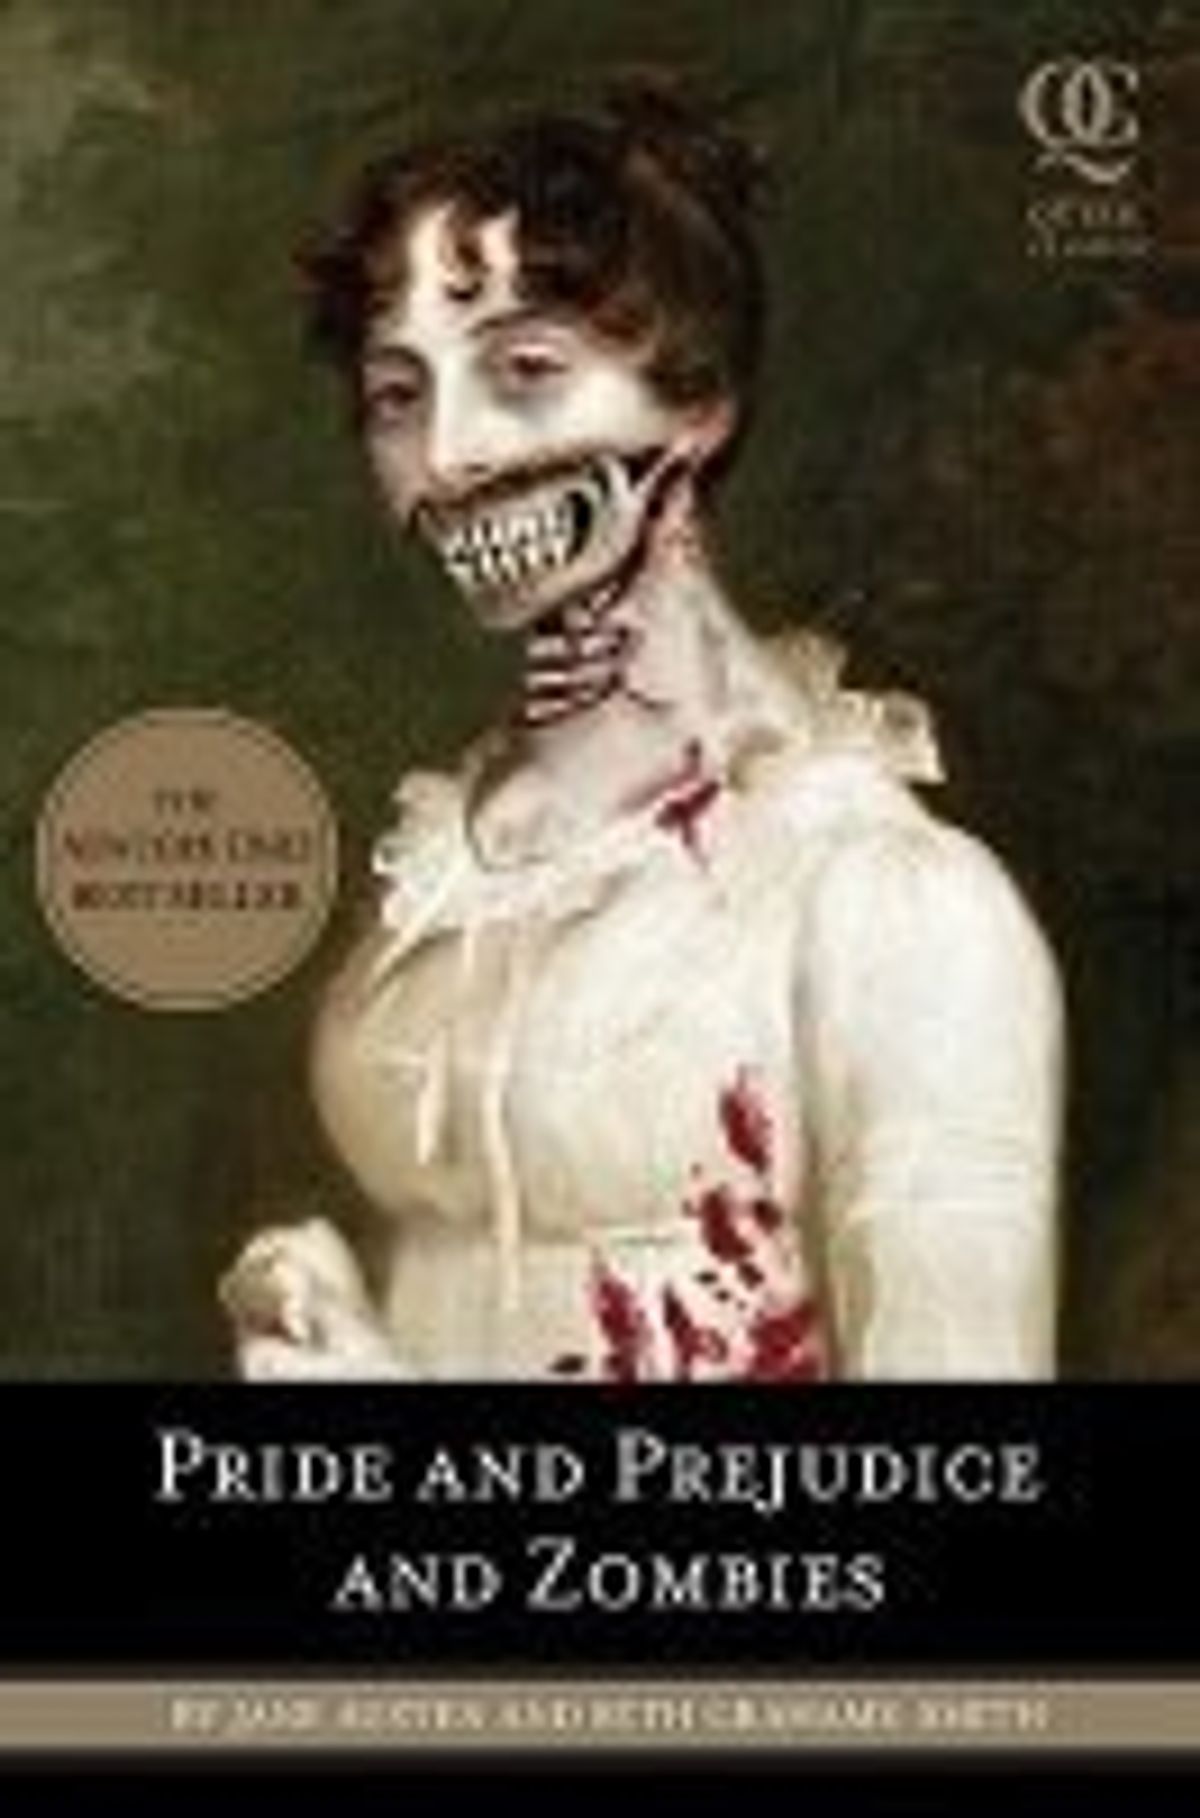 Why I Chose To Read "Pride And Prejudice And Zombies" Before Reading "Pride And Prejudice"